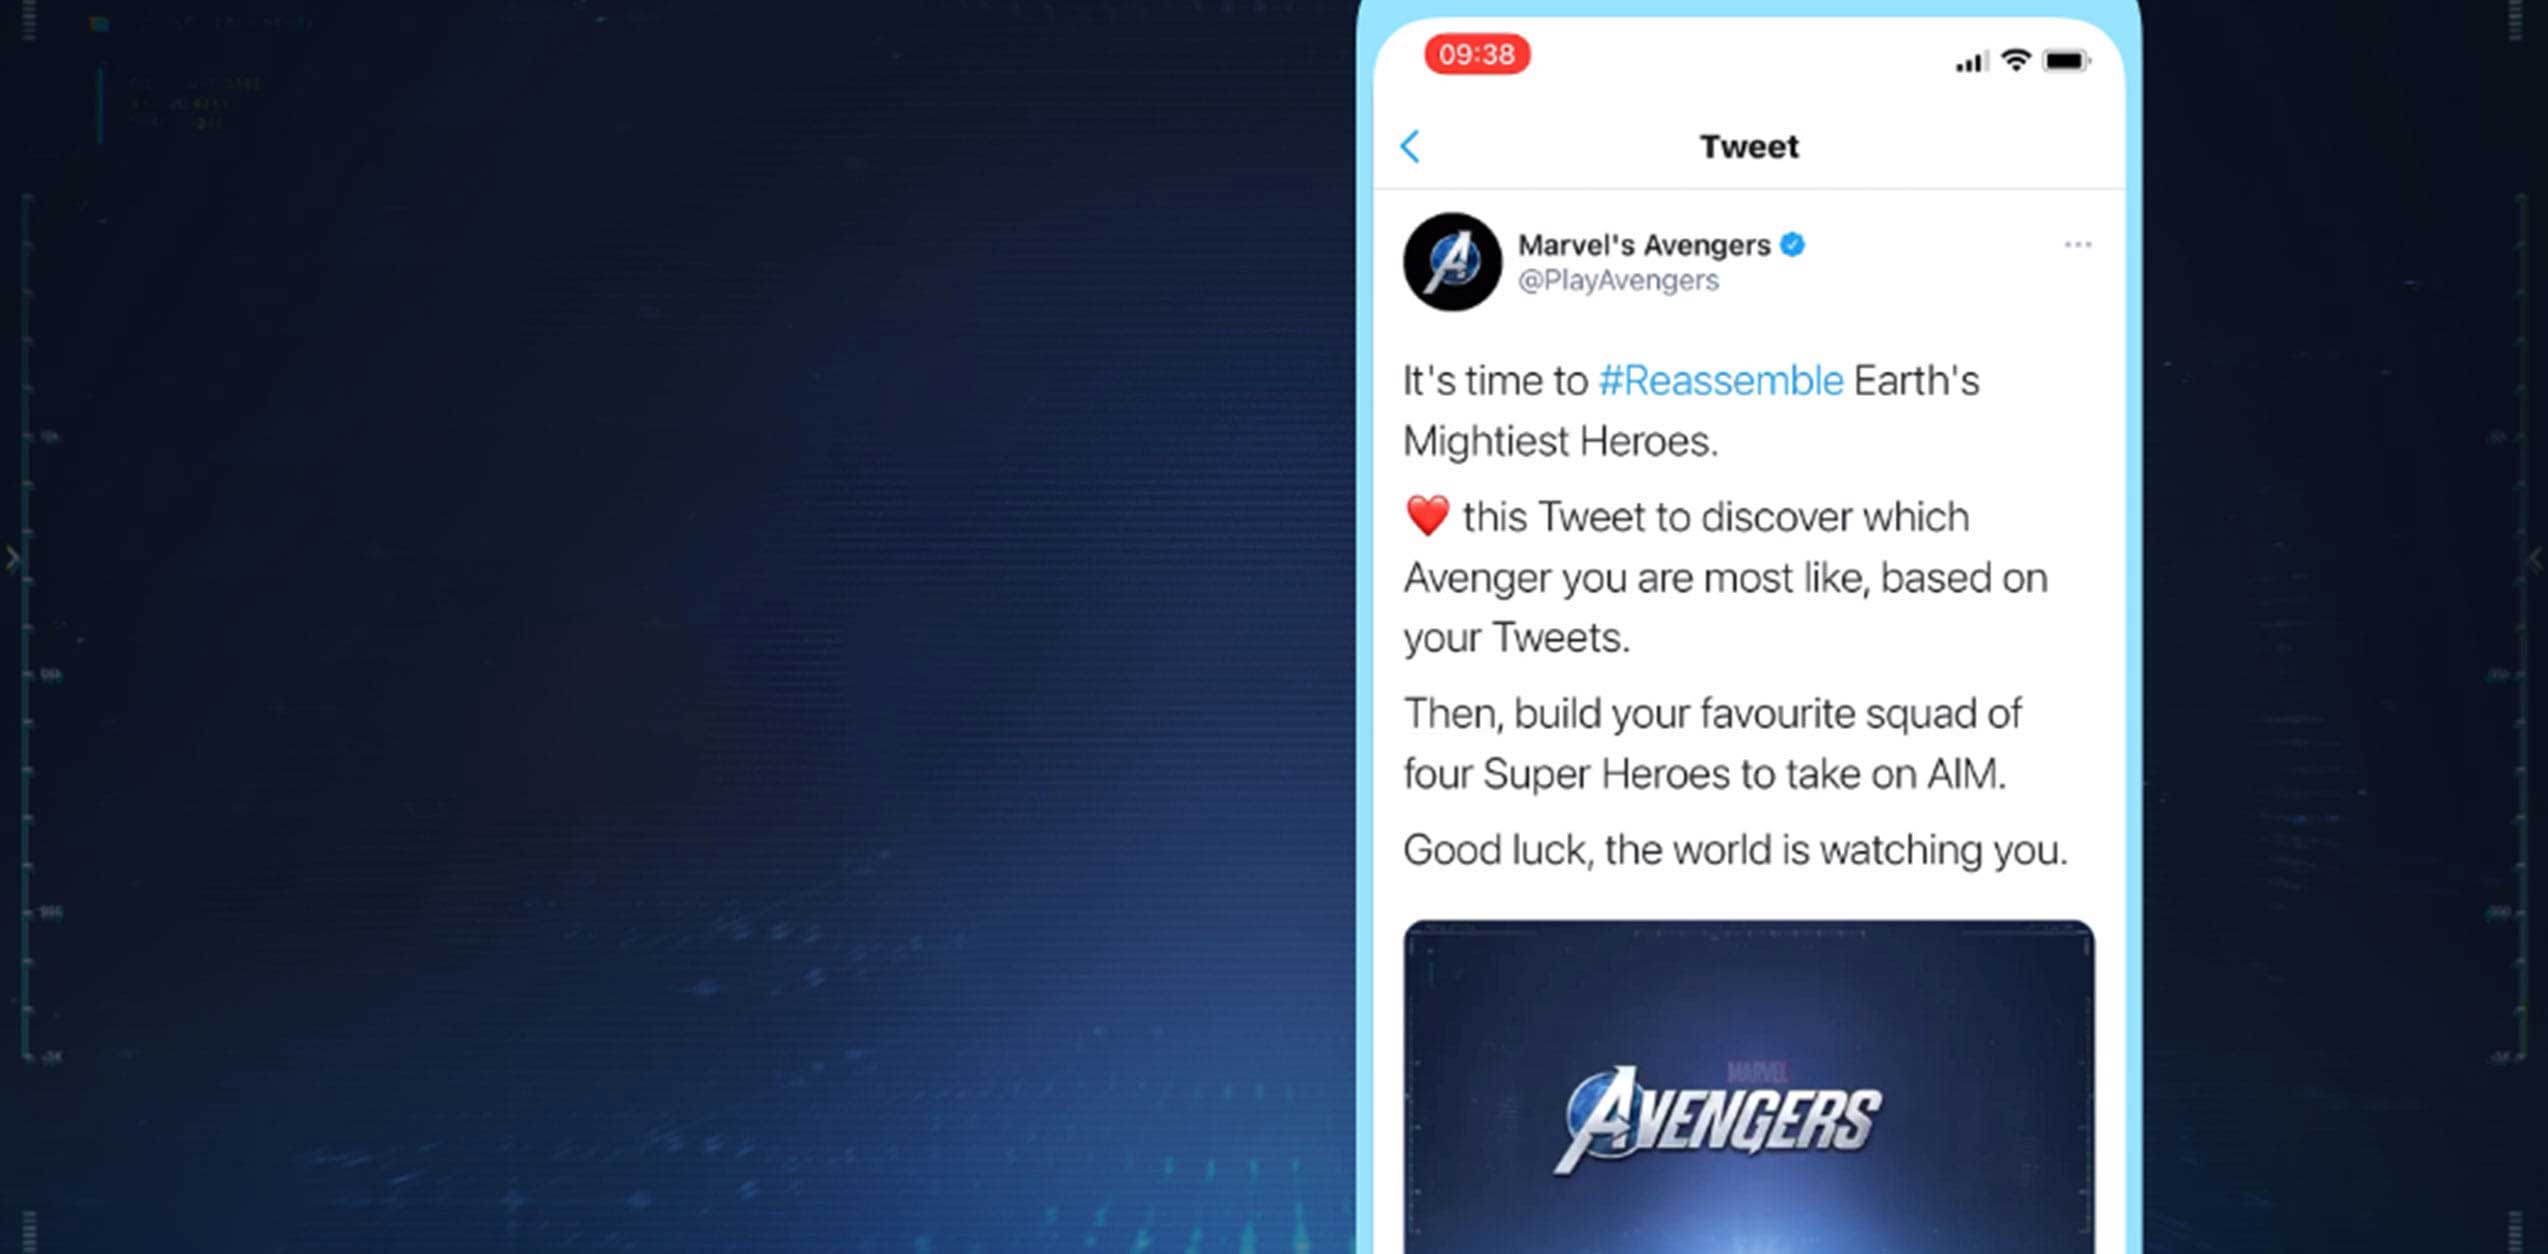 Phone screen showing the Avengers campaign tweet